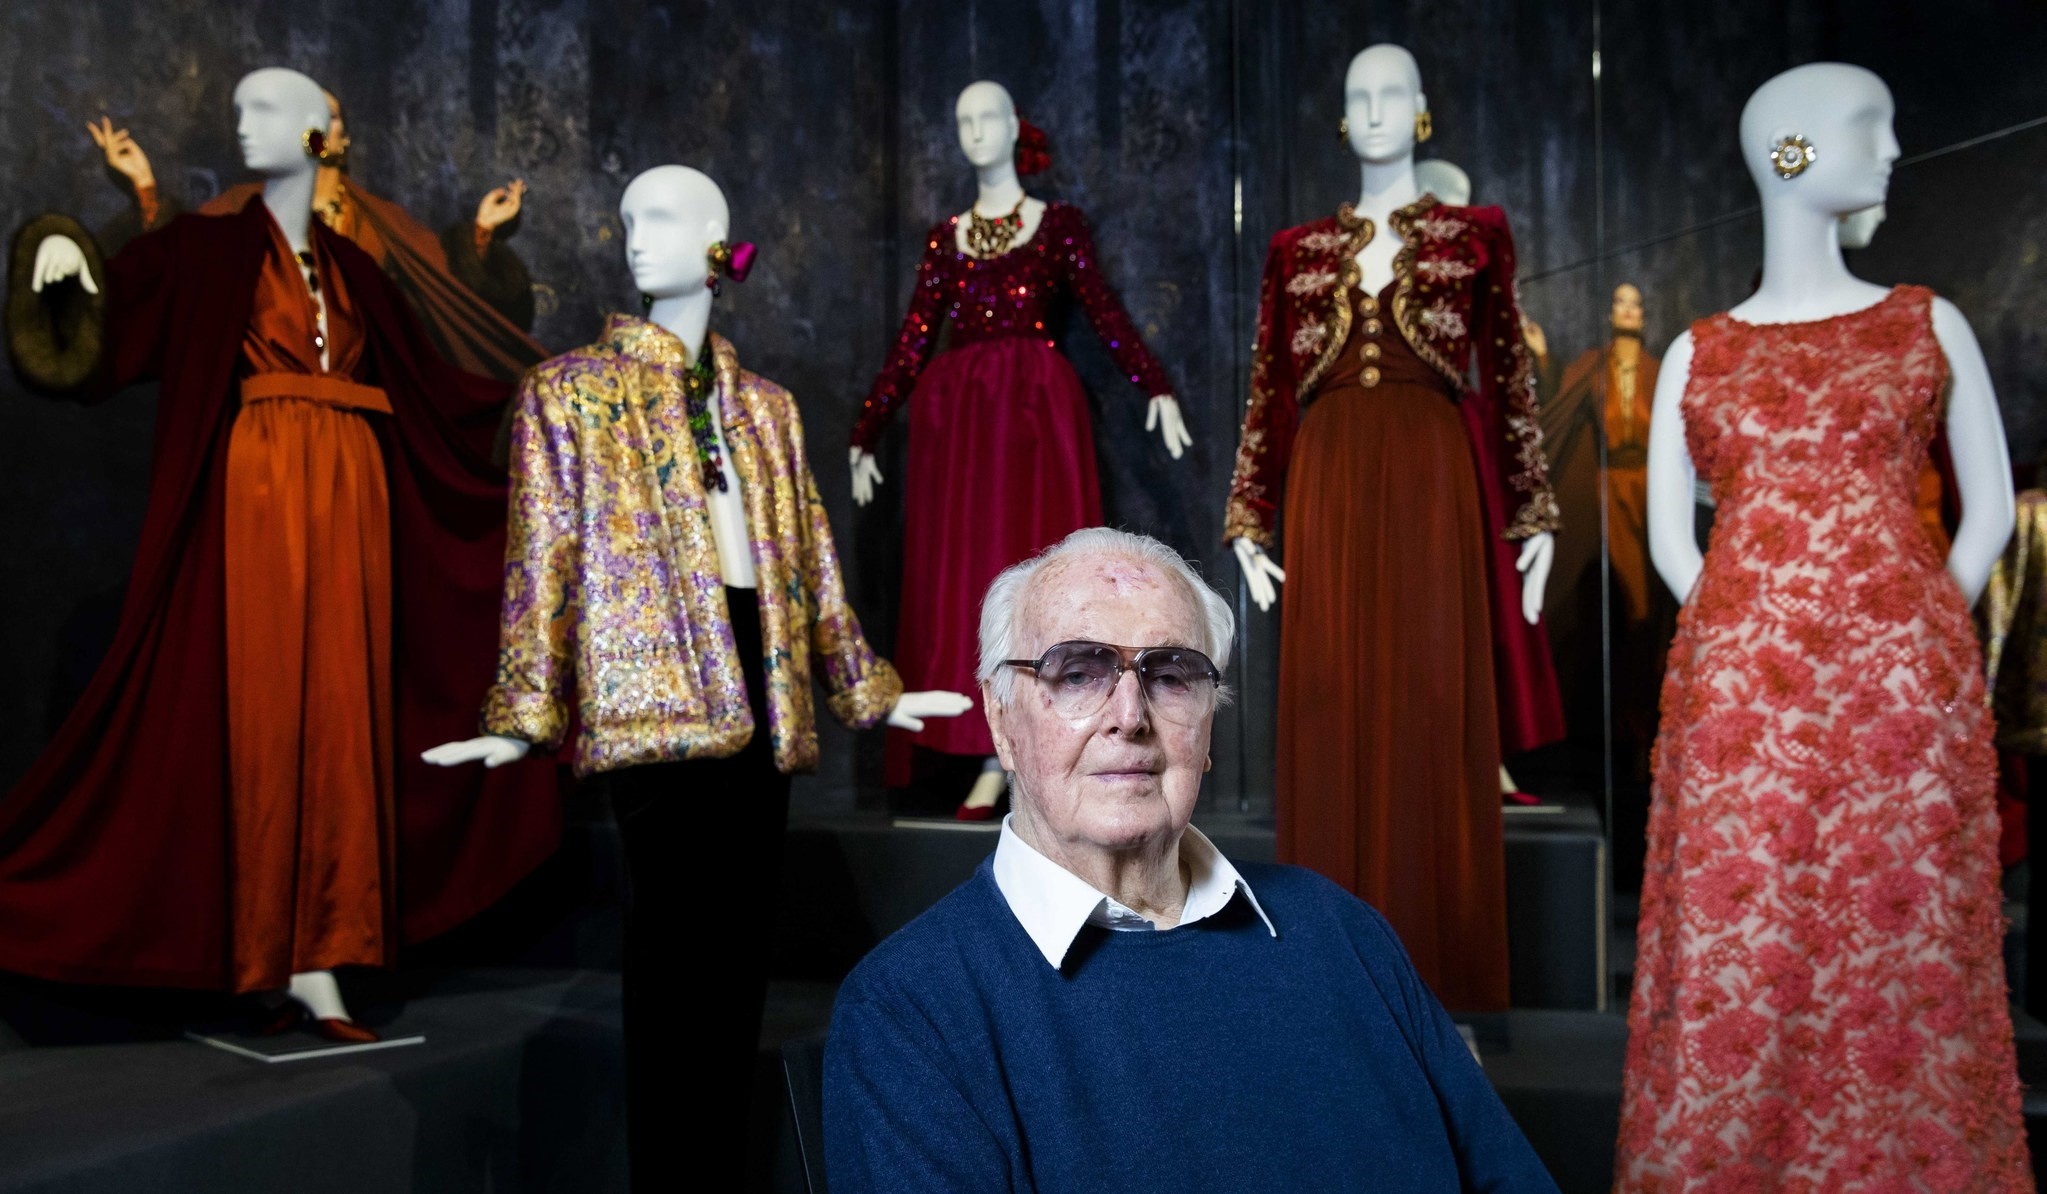 French fashion designer Hubert de Givenchy poses for photos prior to the opening of 'To Audrey With Love', an exhibition of his work at the Gemeentemuseum in The Hague, the Netherlands, 23 November 2016. (EPA Photo)